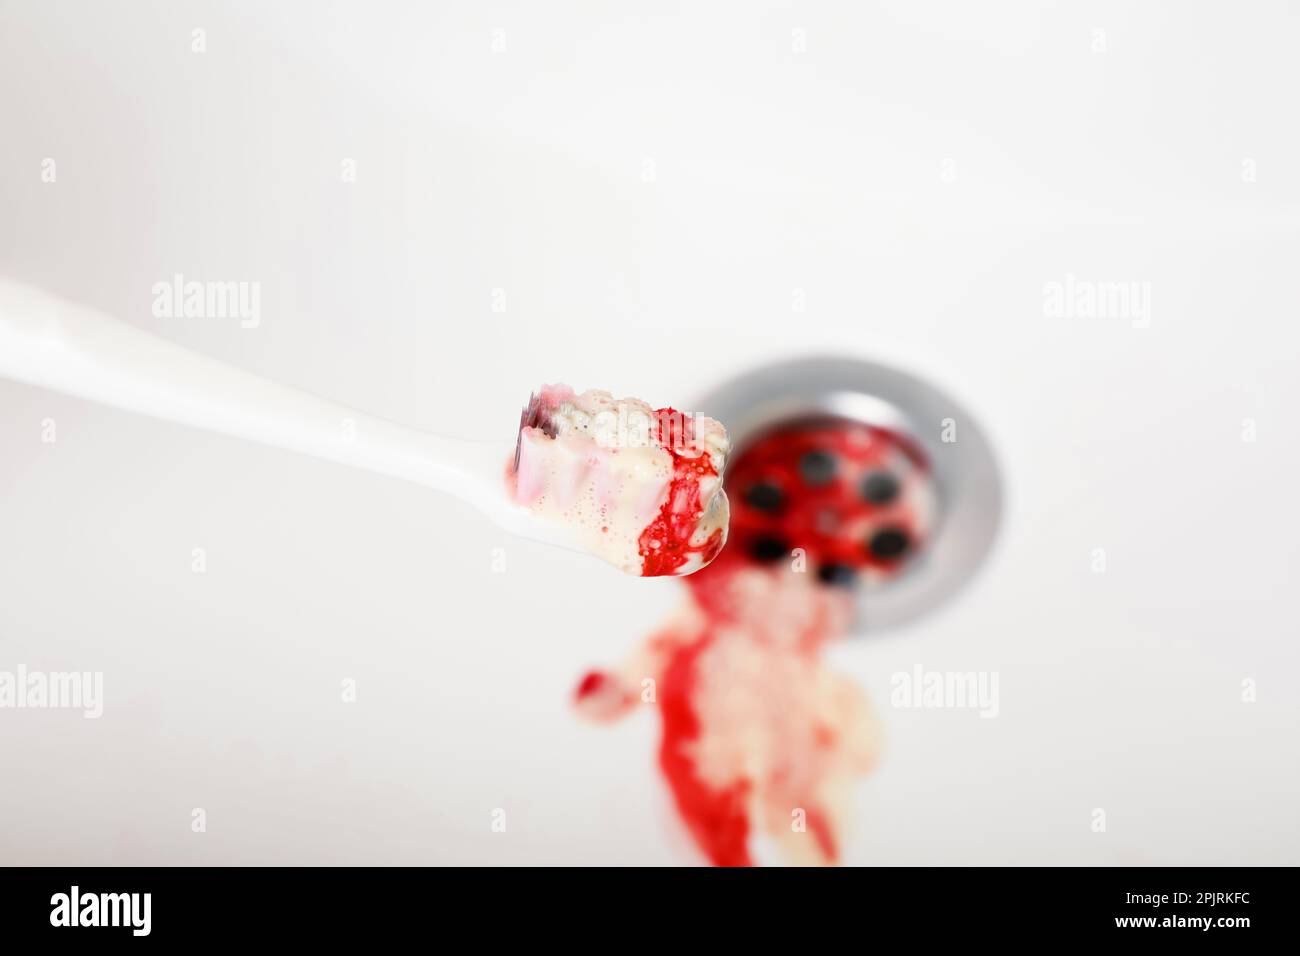 Toothbrush with paste and blood over sink, closeup. Gum inflammation Stock Photo